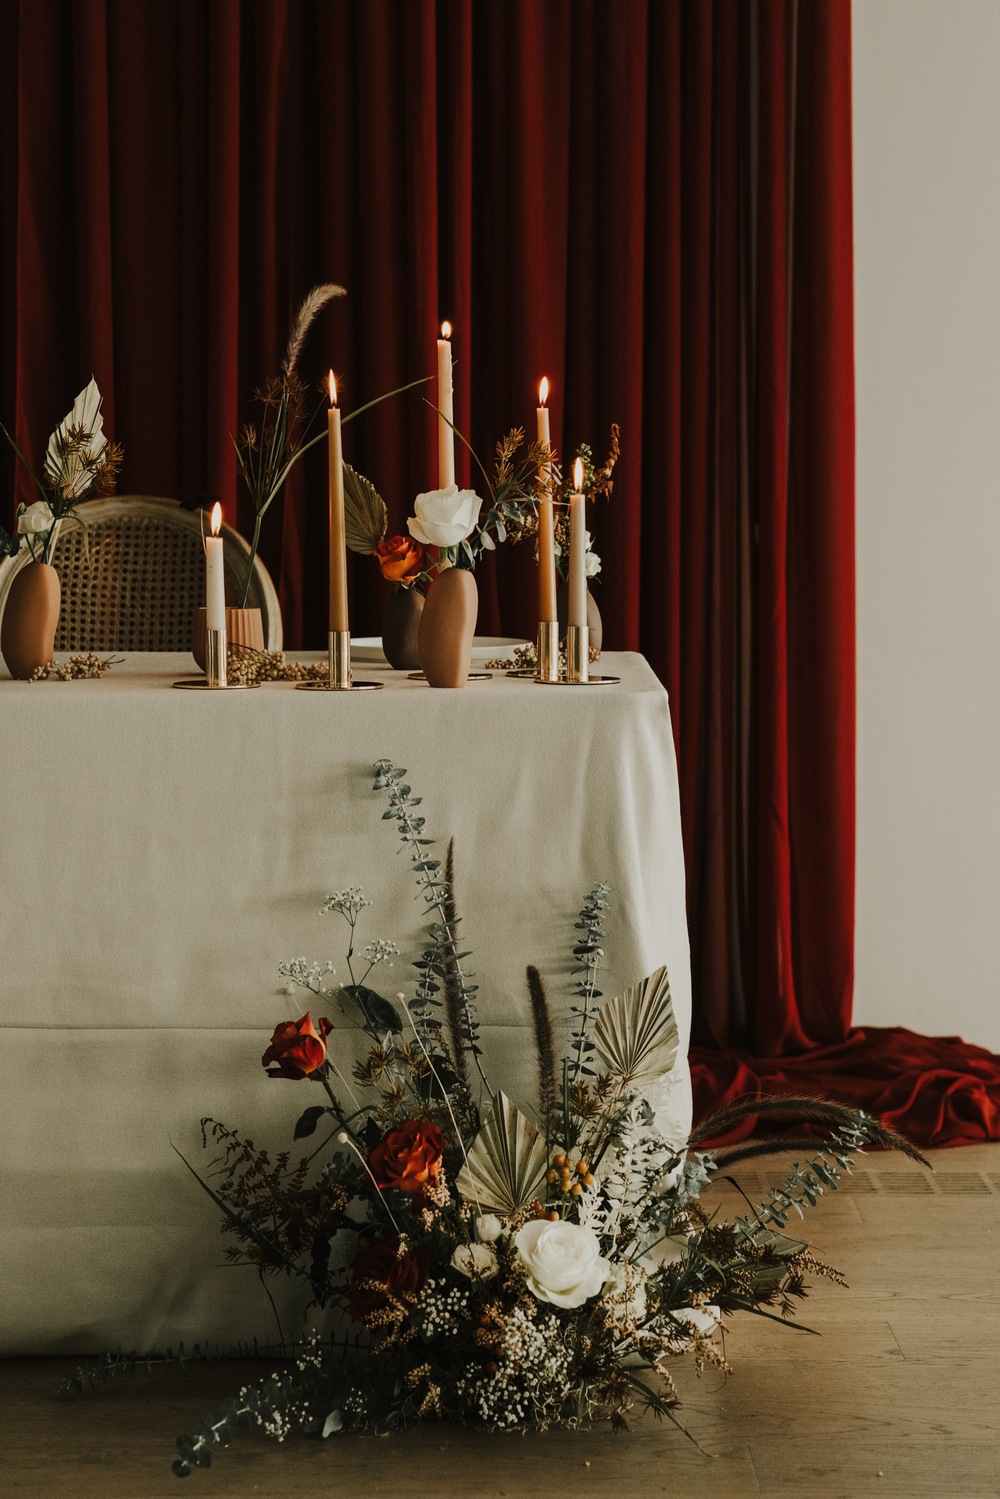 Festive Ideas For Your Holiday Wedding That Aren’t Too Literal